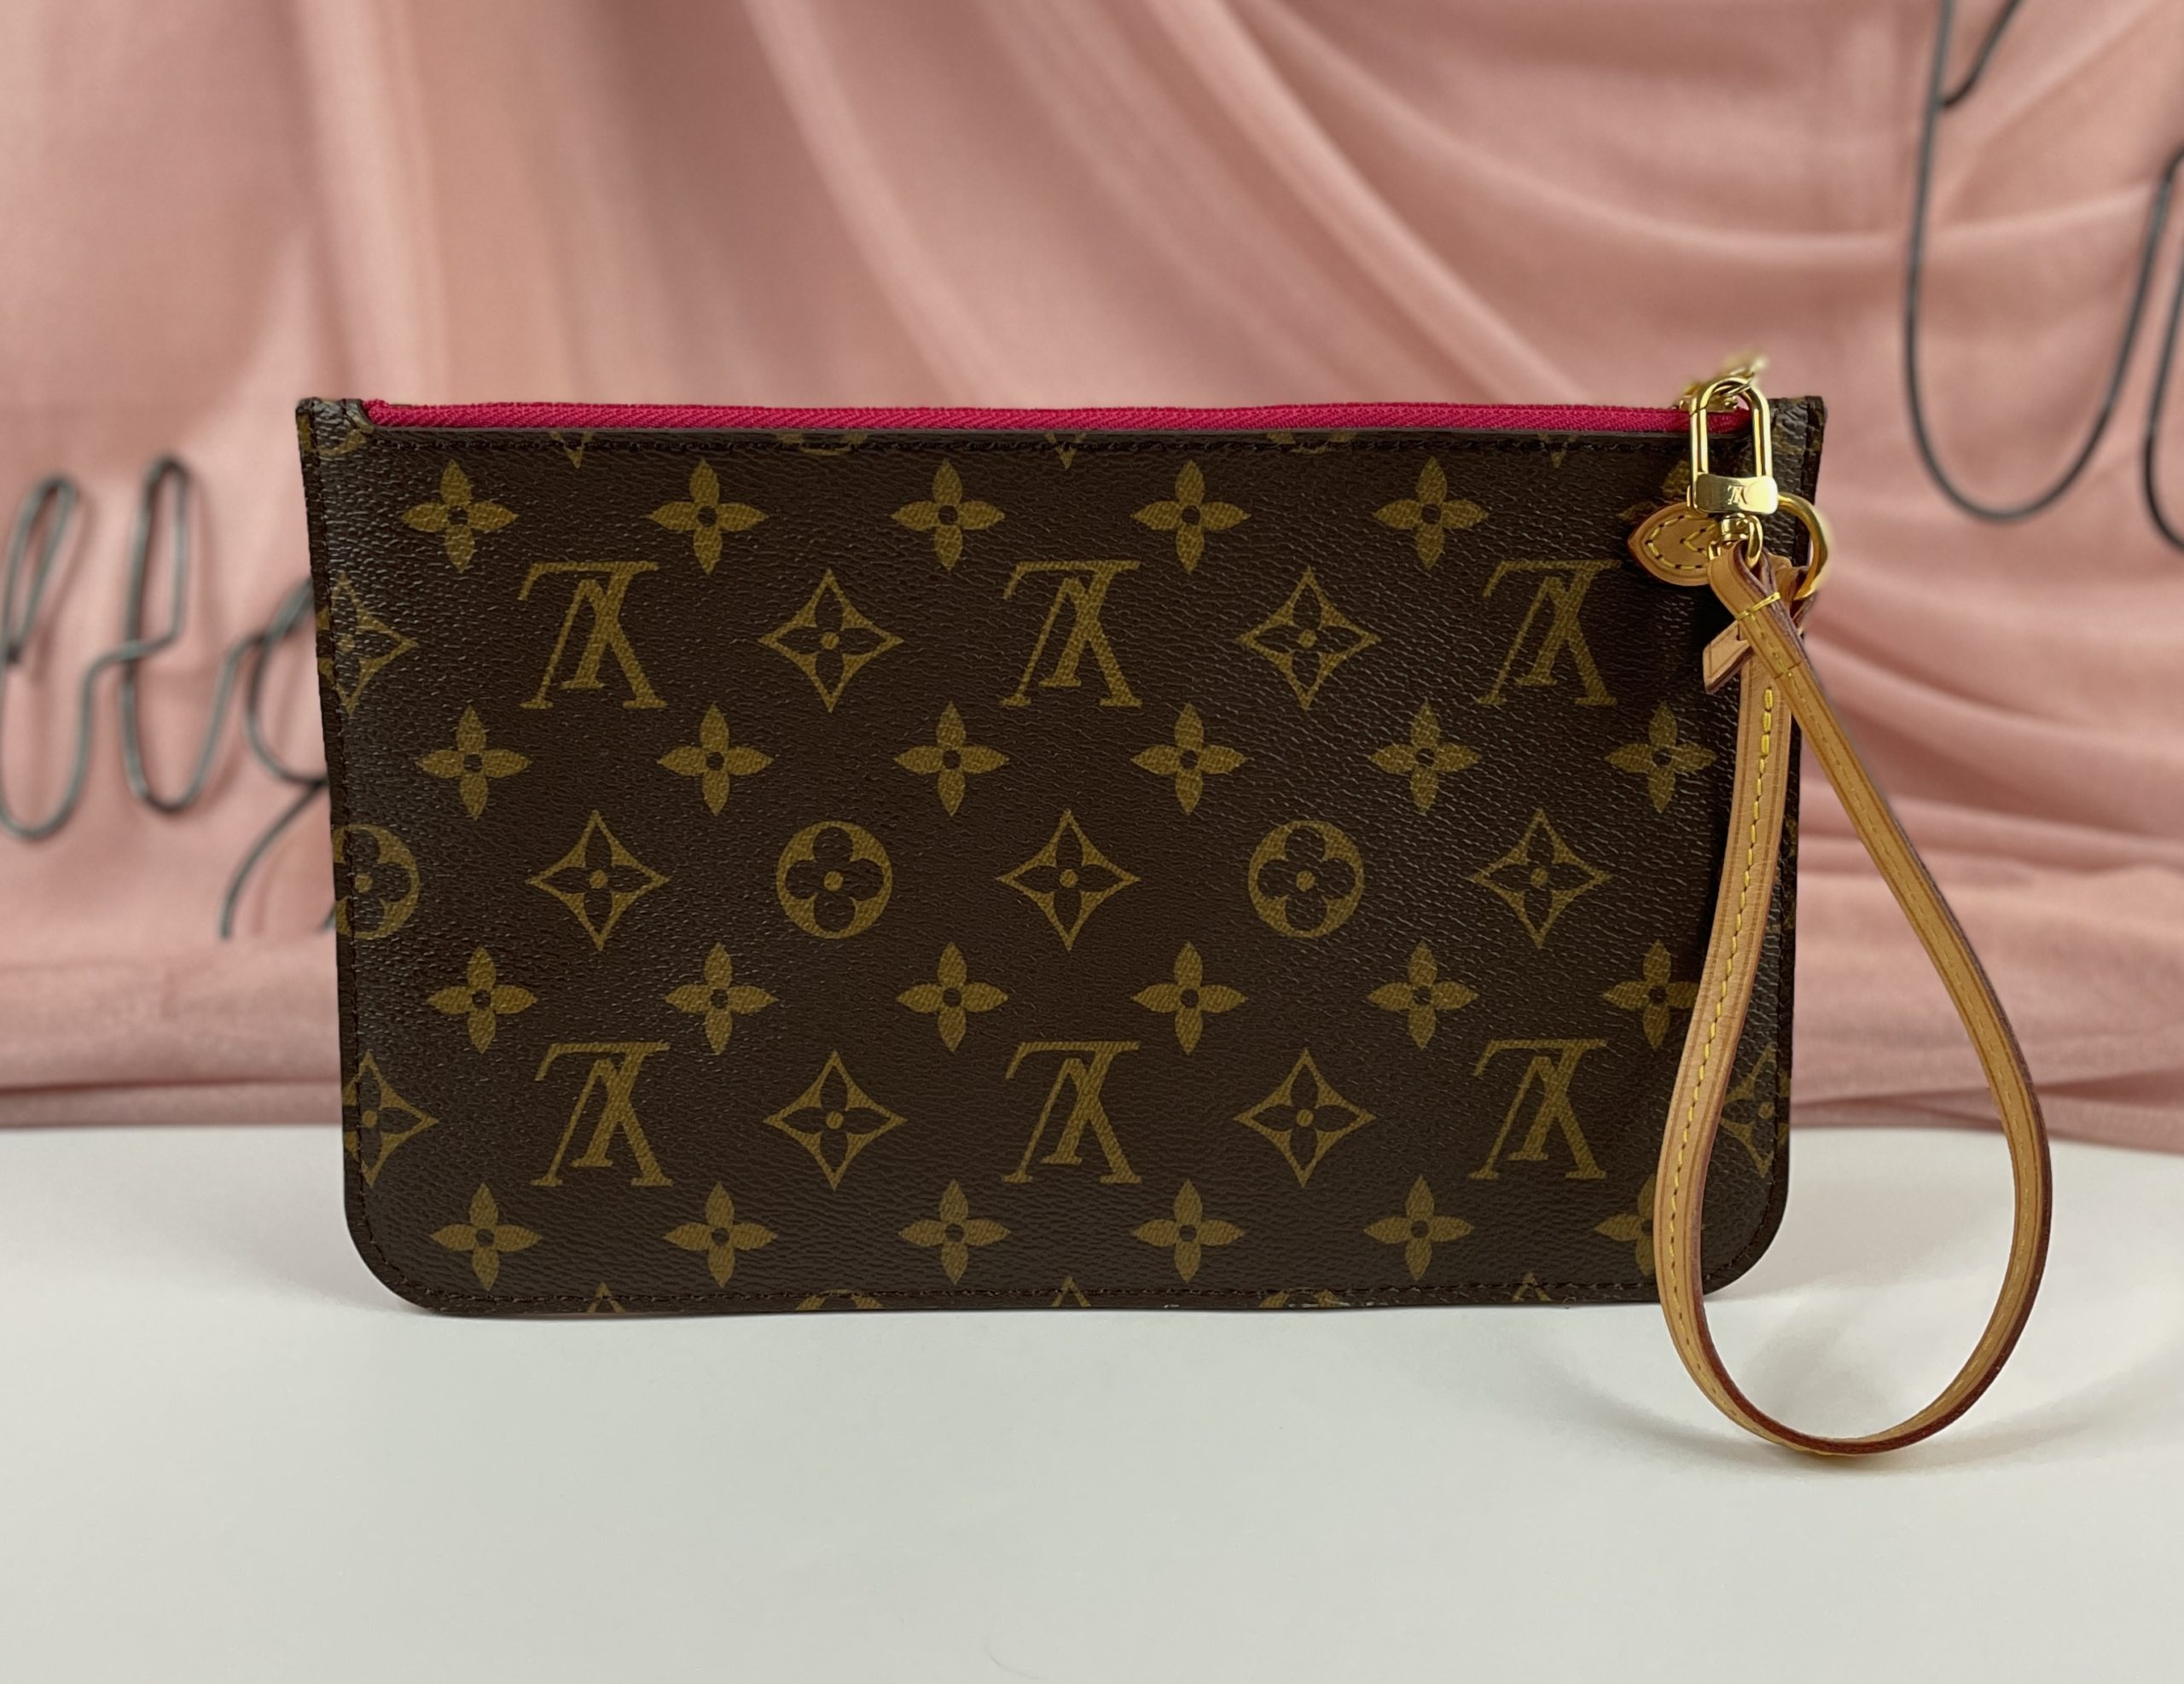 Louis Vuitton Wristlets On Sale Up To 90% Off Retail